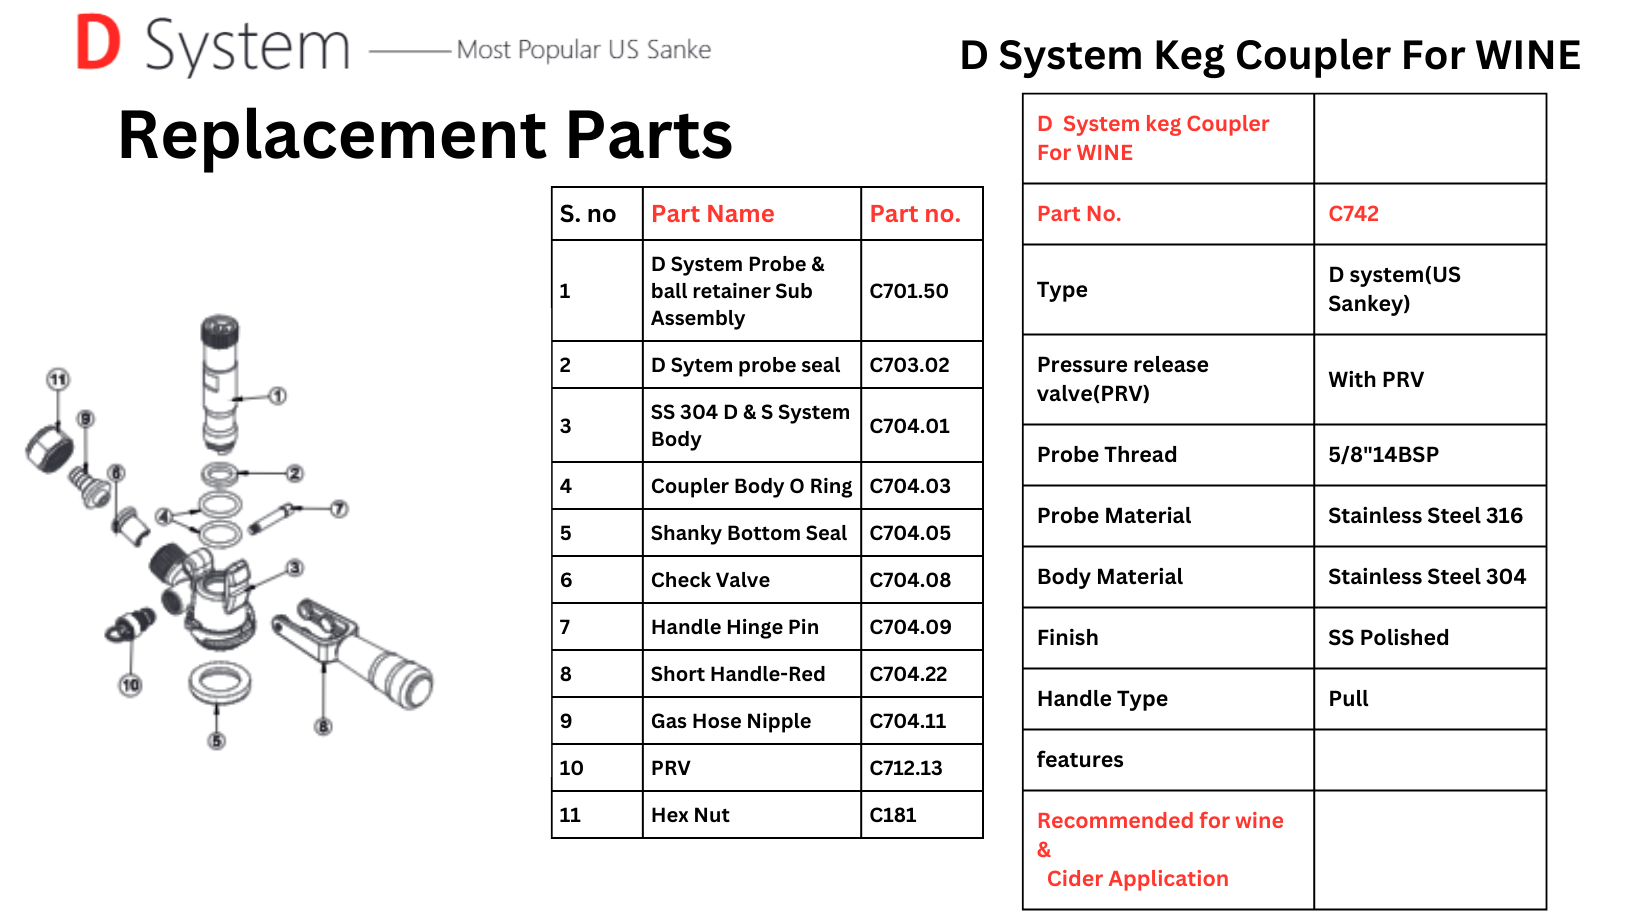 Replacement parts for D system Keg coupler